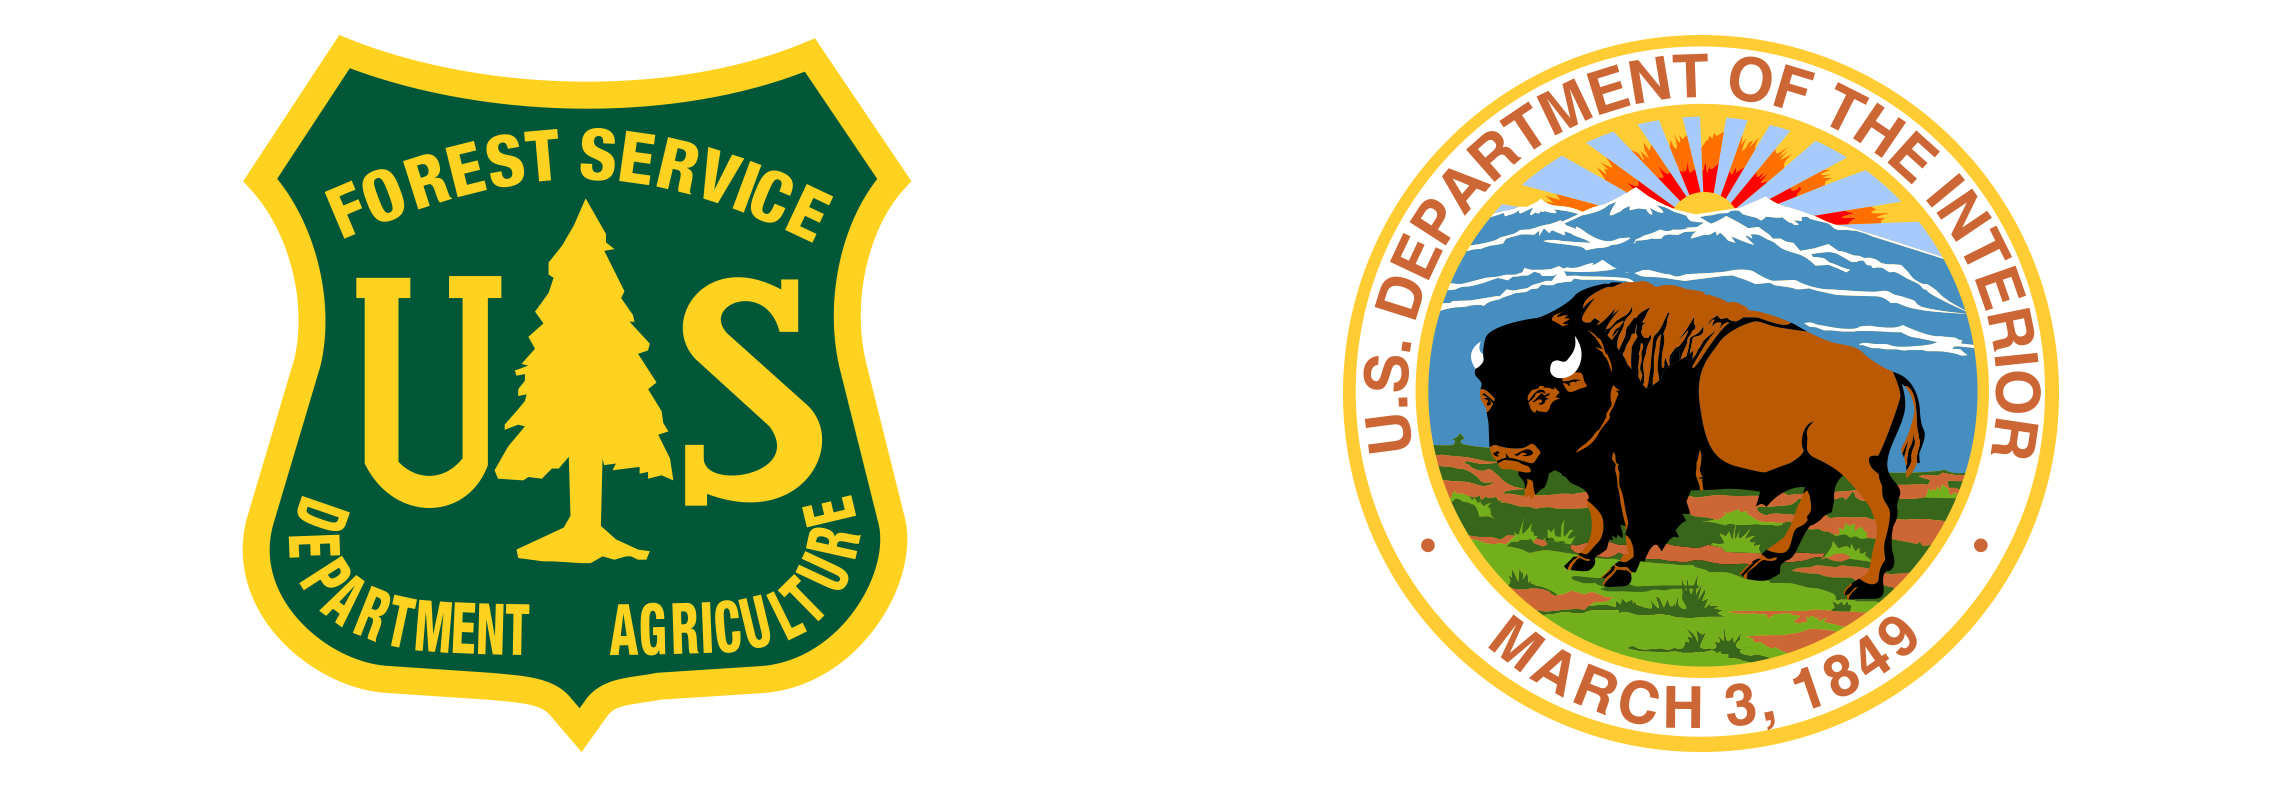 USDA Forest Service and U.S. Department of the Interior logos